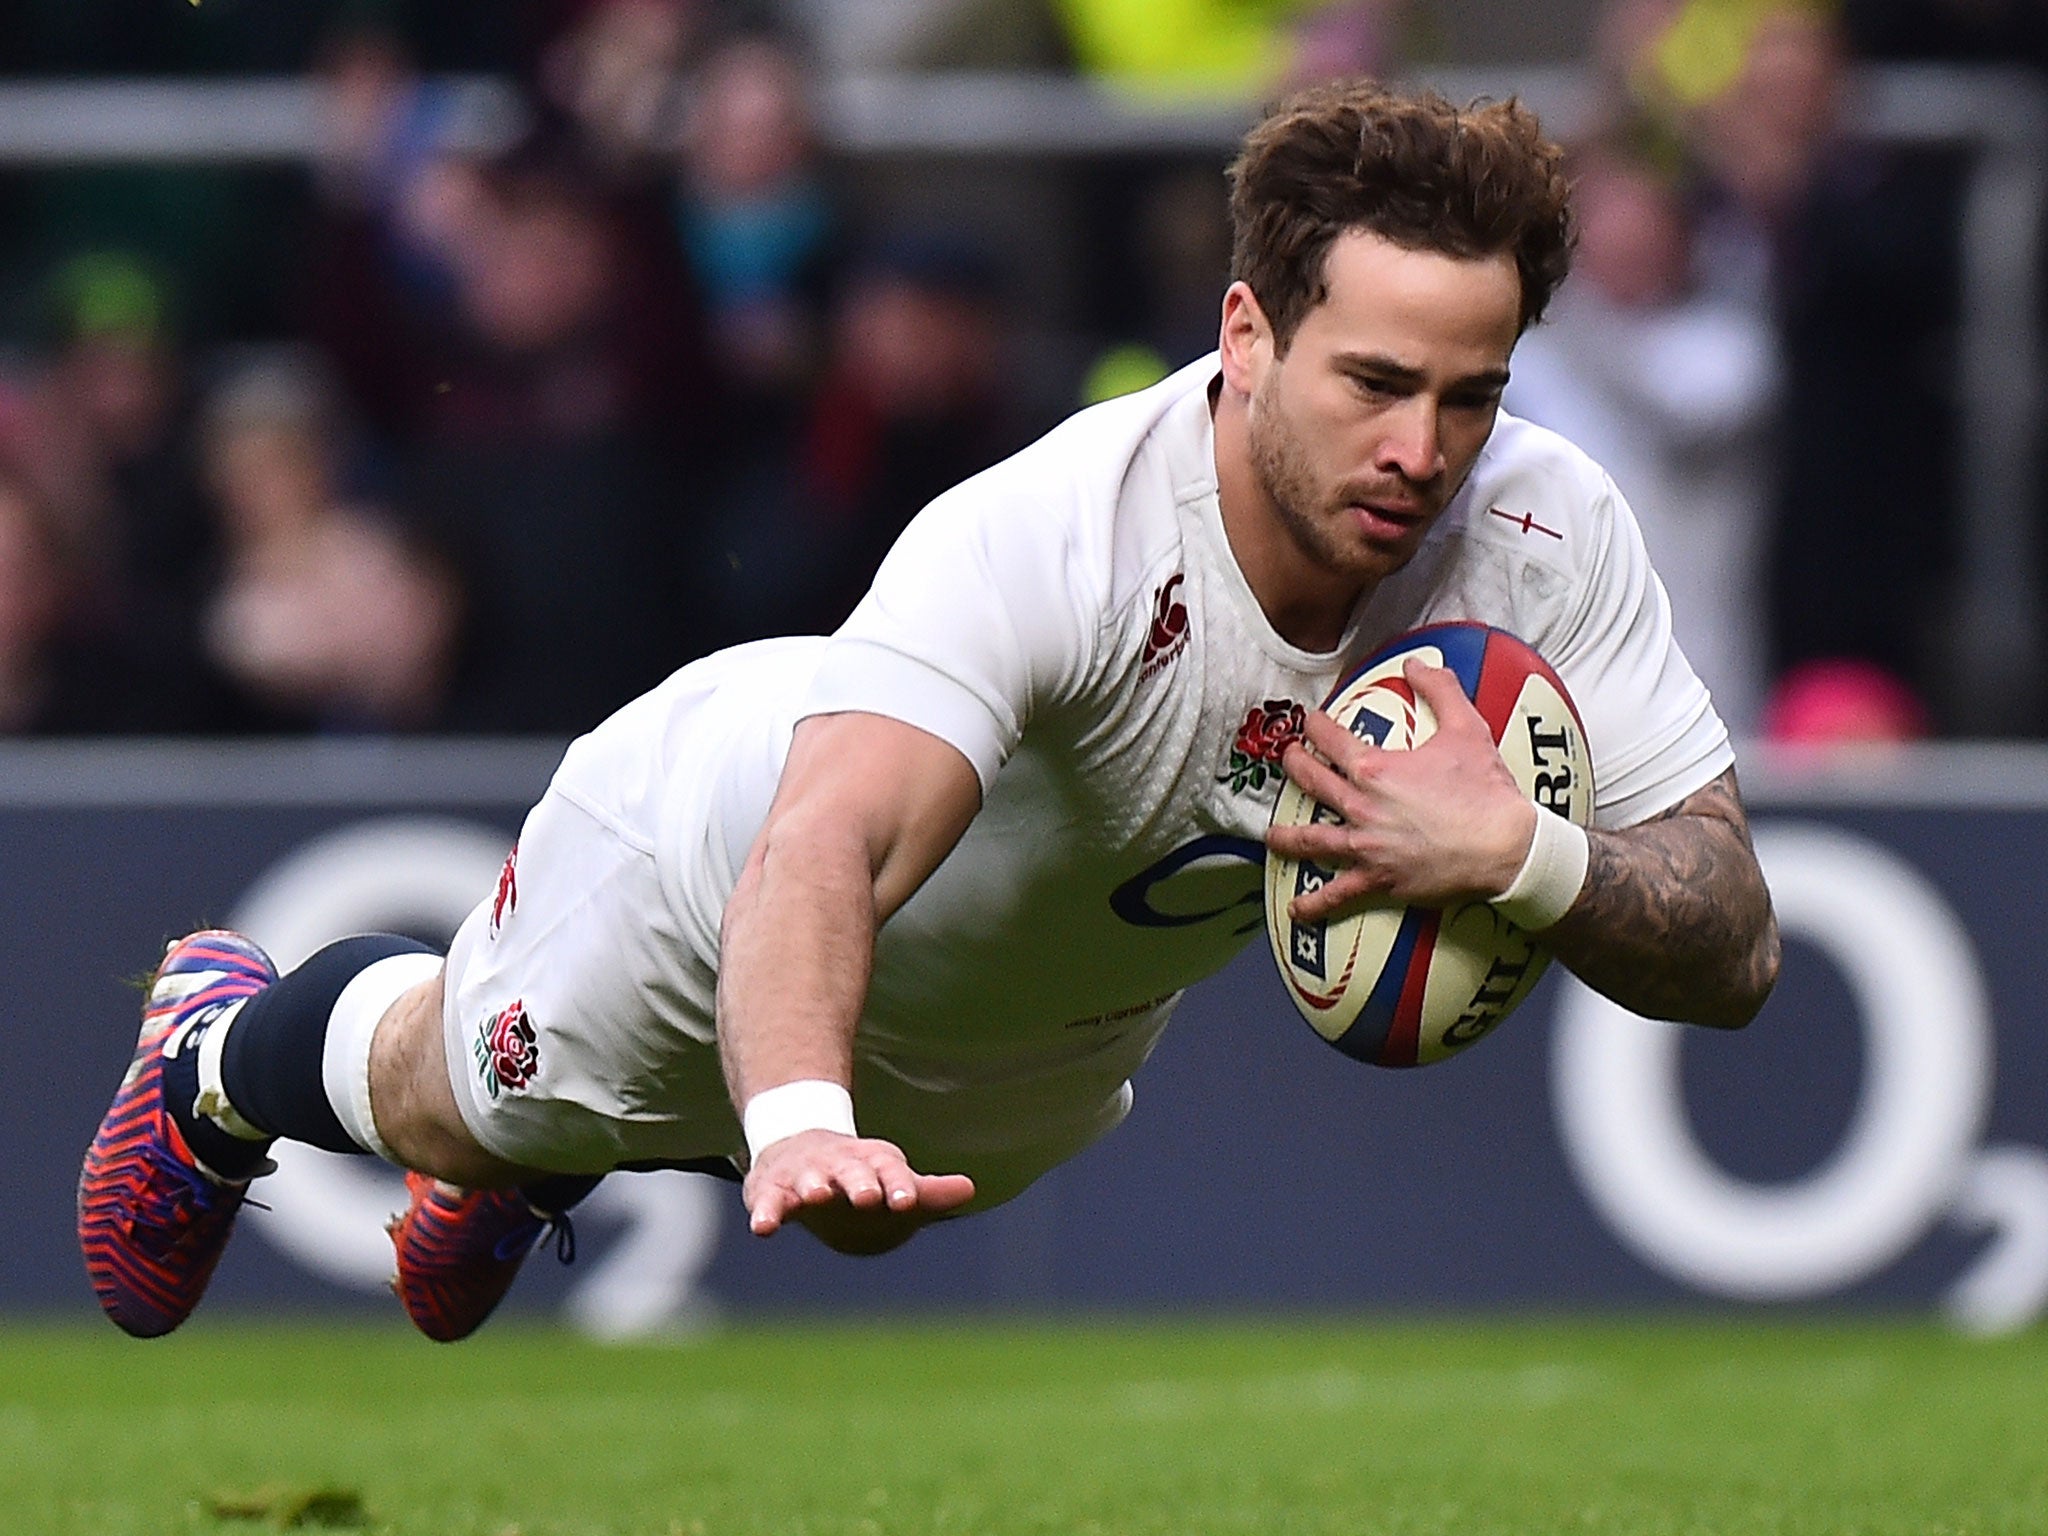 Danny Cipriani dives over the line to score a try